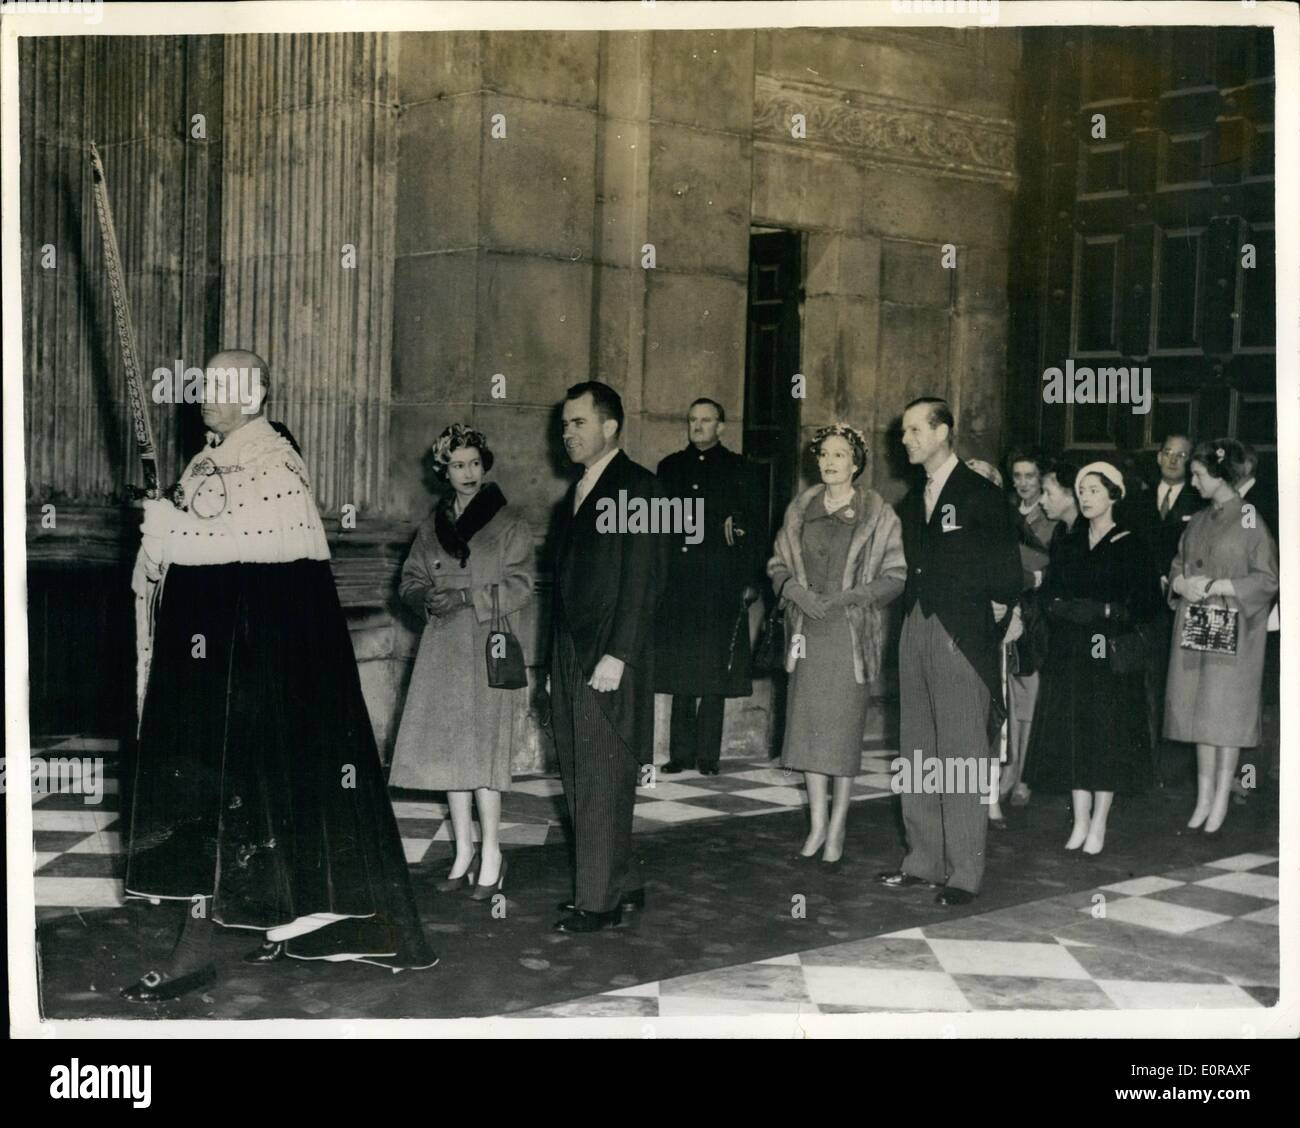 Nov. 11, 1958 - American Memorial Chapel dedicated at St. Paul's Procession into the Cathedral: The American Memorial Chapel was dedicated at St. Paul's Cathedral today in the presence of H.M. The Queen and other members of the Royal family - and Vice President Nixon of the United states. Photo shows Sir Harold Gillett the Lord Mayor of London bears the Pearl Sword as he leads the Queen with Vice Press. Nixon; Duke of Edinburgh with Mrs. Nixon followed by Princess Margaret; princess Alexandra of Kent other Royal family members and Mr. John hay Whitney the U.S. Ambassador. Stock Photo